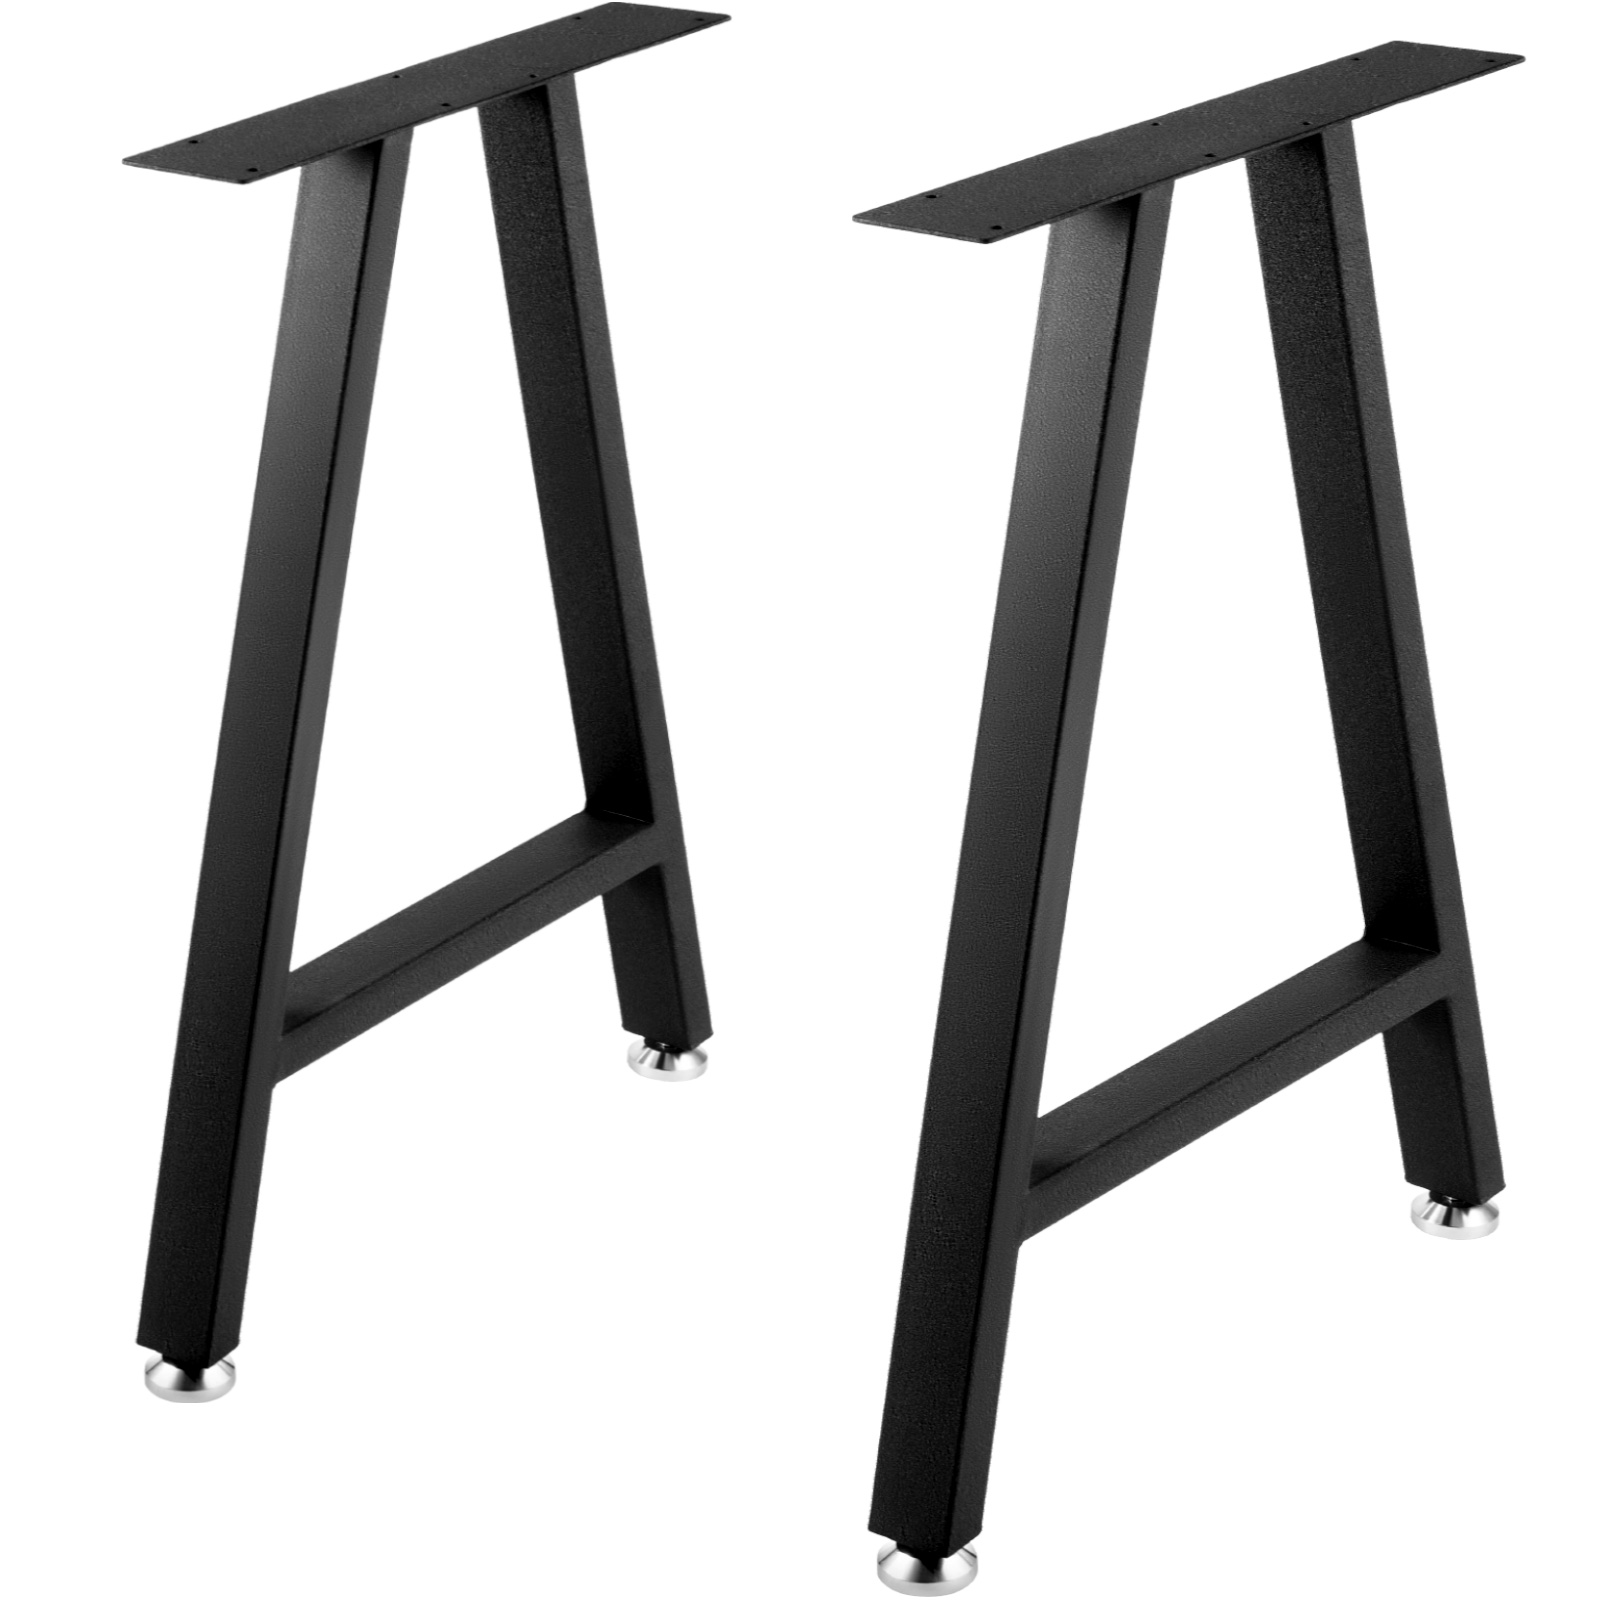 Metal White Table Legs 28 Inch Furniture Legs,Dining Table Legs,Metal Legs  for Desk, Office Table Legs(Without Planks)